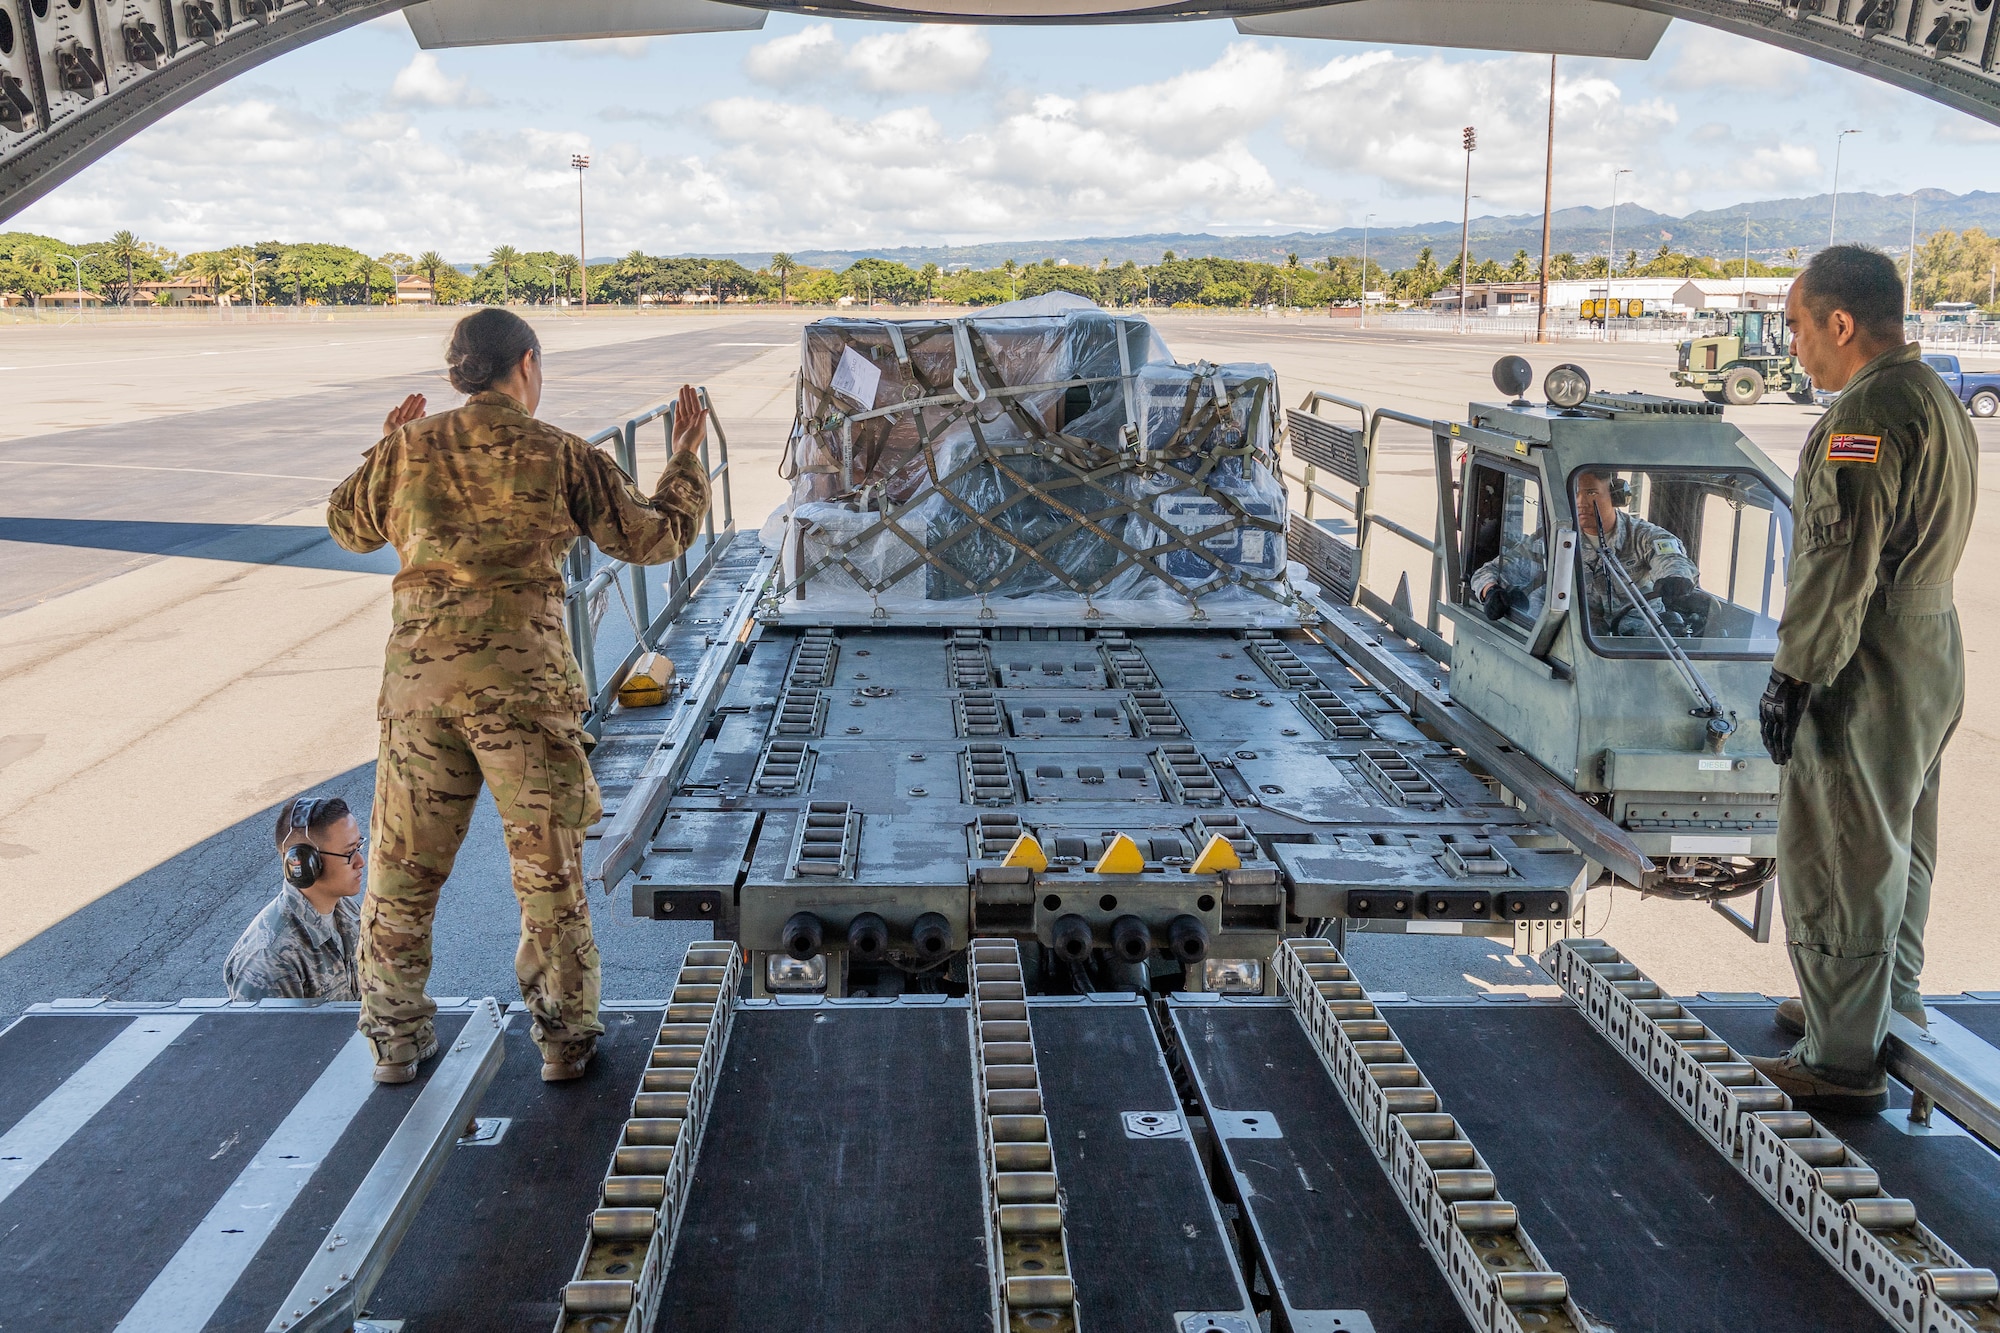 A team of Reserve Citizen Airmen from the 48th Aerial Port Squadron, load equipment onto a U.S. Air Force C-17 Globemaster III aircraft during an aeromedical staging and aerial port training at Joint Base Pearl Harbor-Hickam, Hawaii, March 3, 2019.